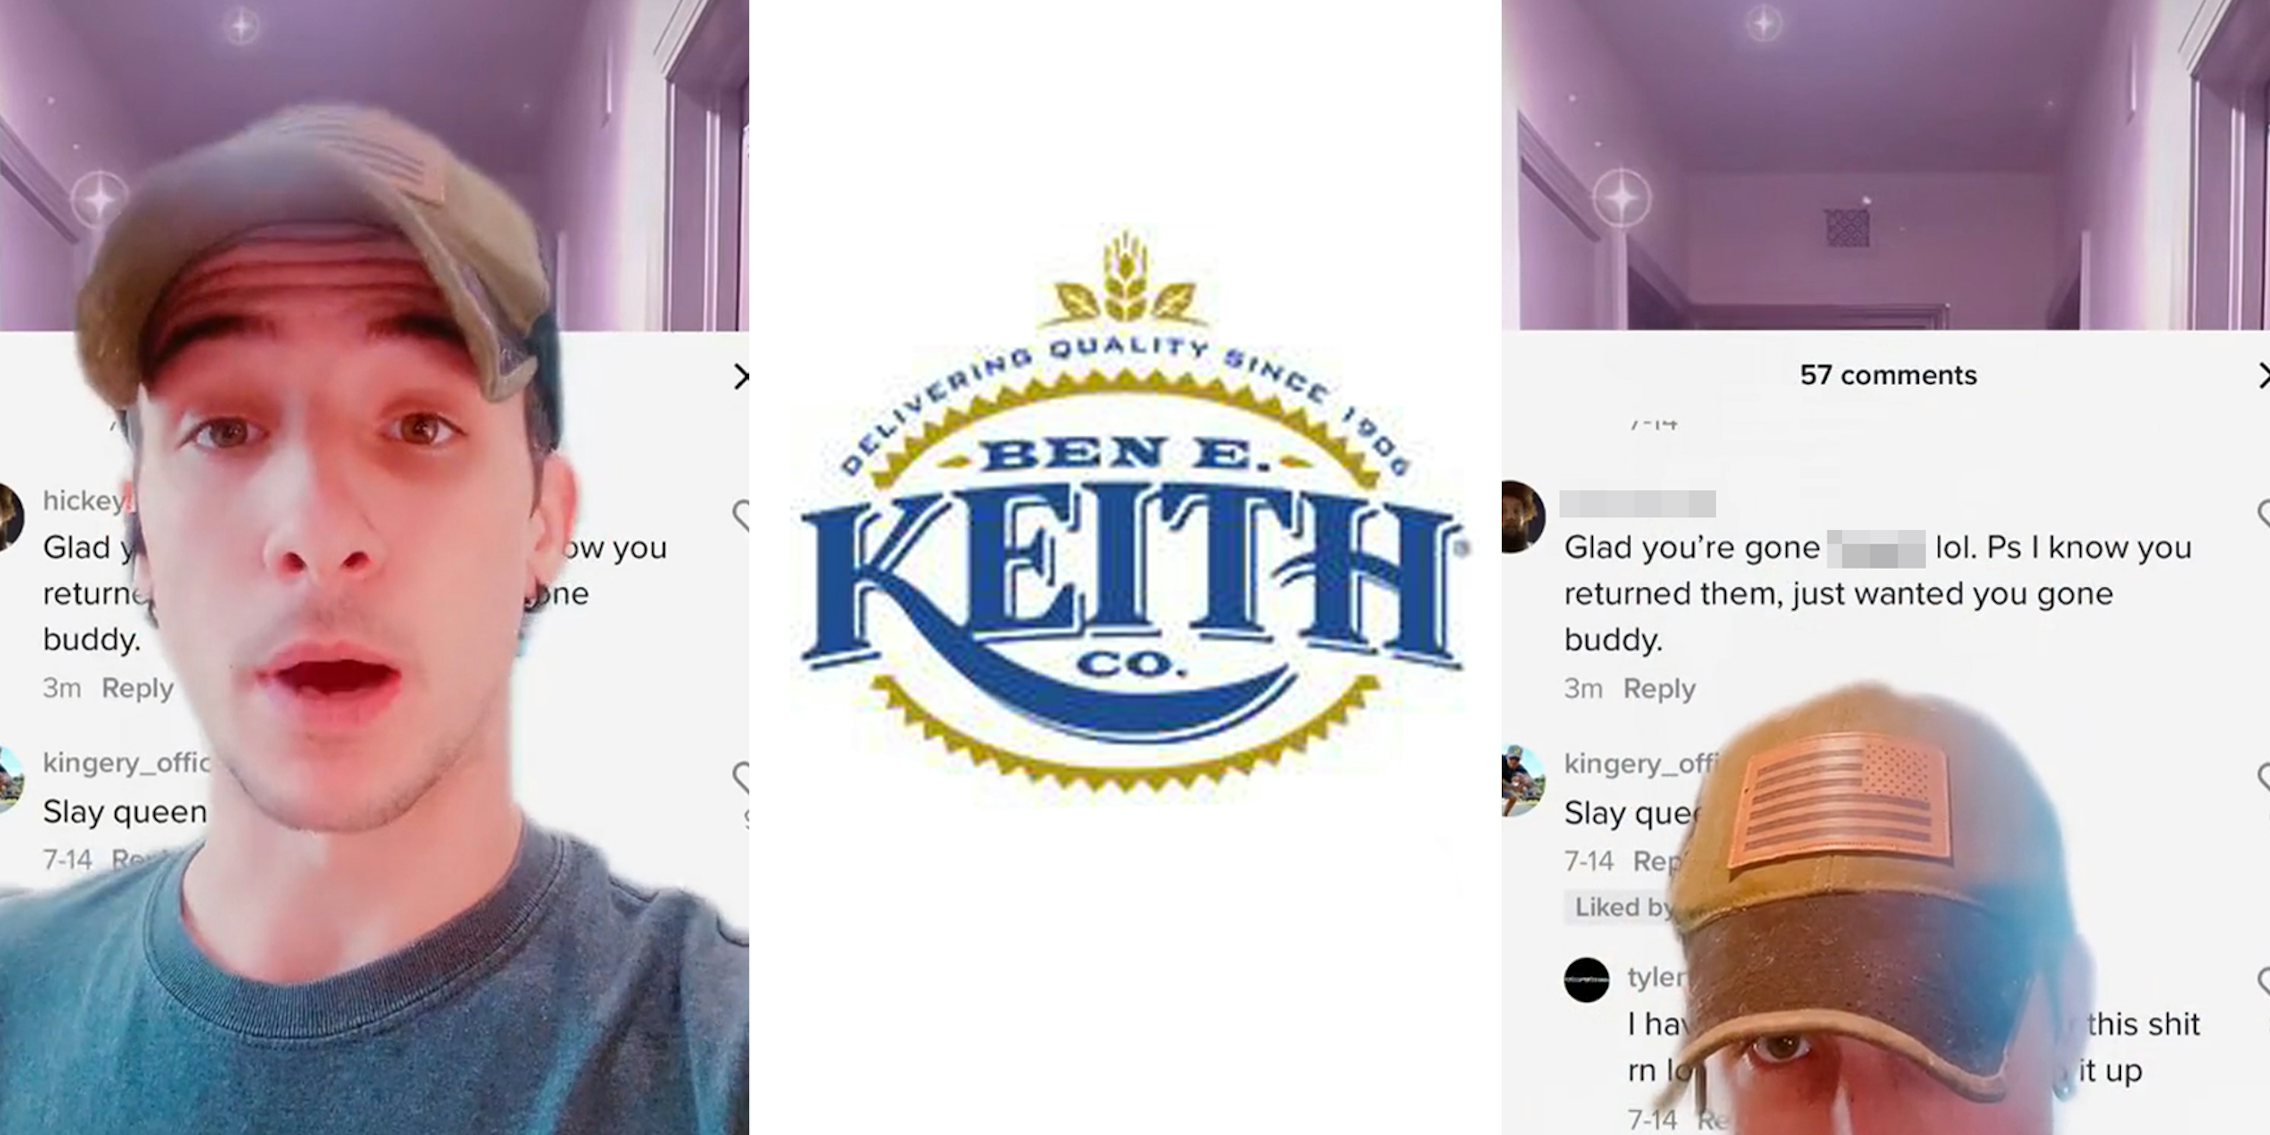 man greenscreen TikTok over TikTok comments (l) Ben E Keith logo on white background (c) man greenscreen TikTok over TikTok comments 'Glad you're gone blank lol. Ps I know you returned them, just wanted you gone buddy.' (r)